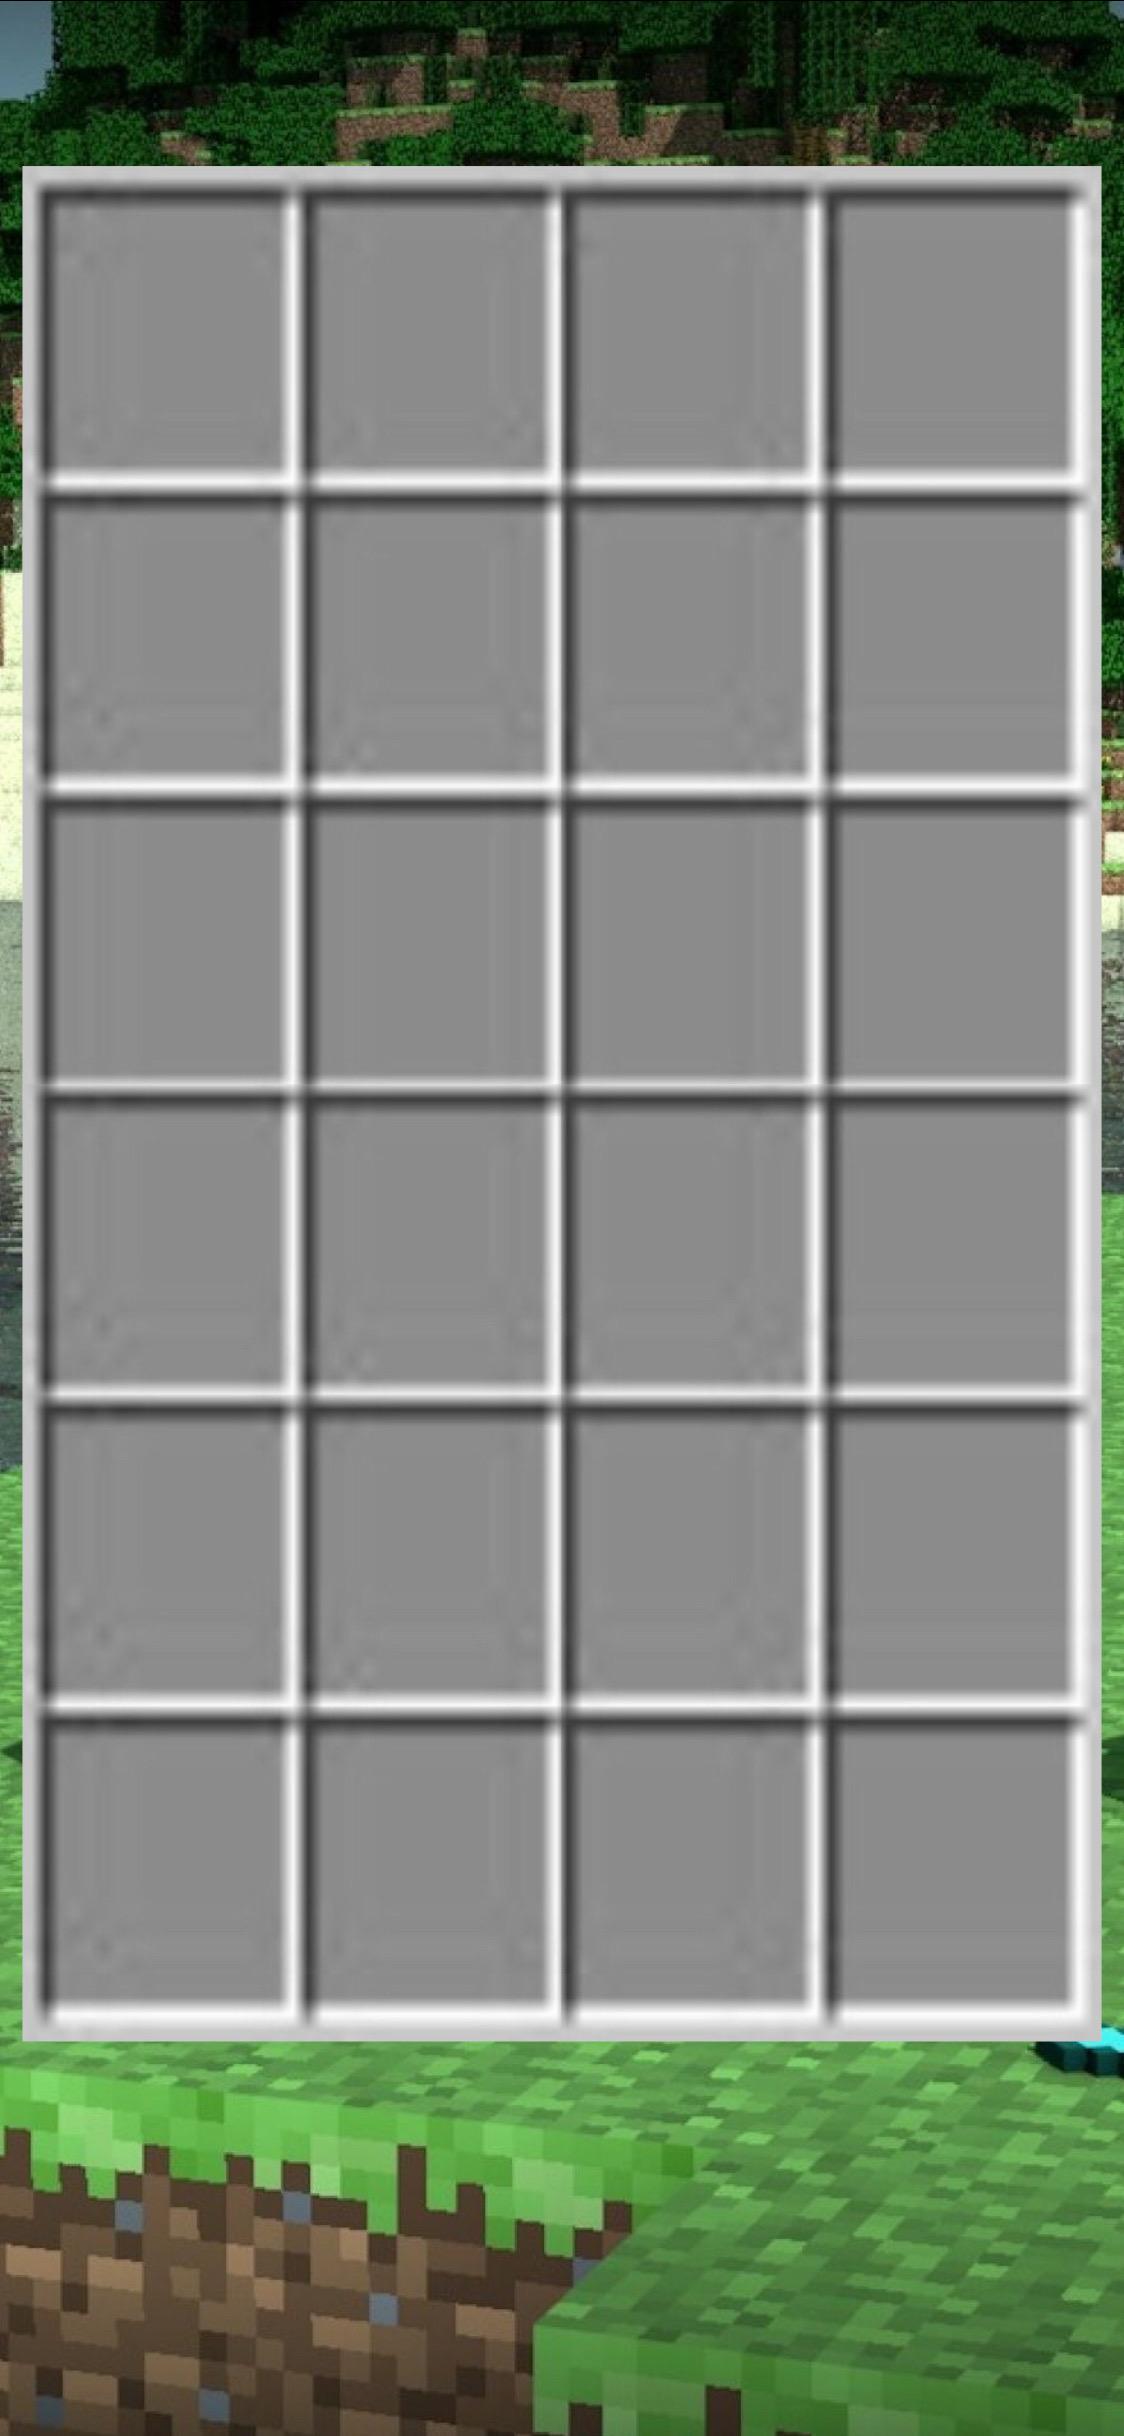 Minecraft Inventory Wallpapers Top Free Minecraft Inventory Backgrounds Wallpaperaccess 0186